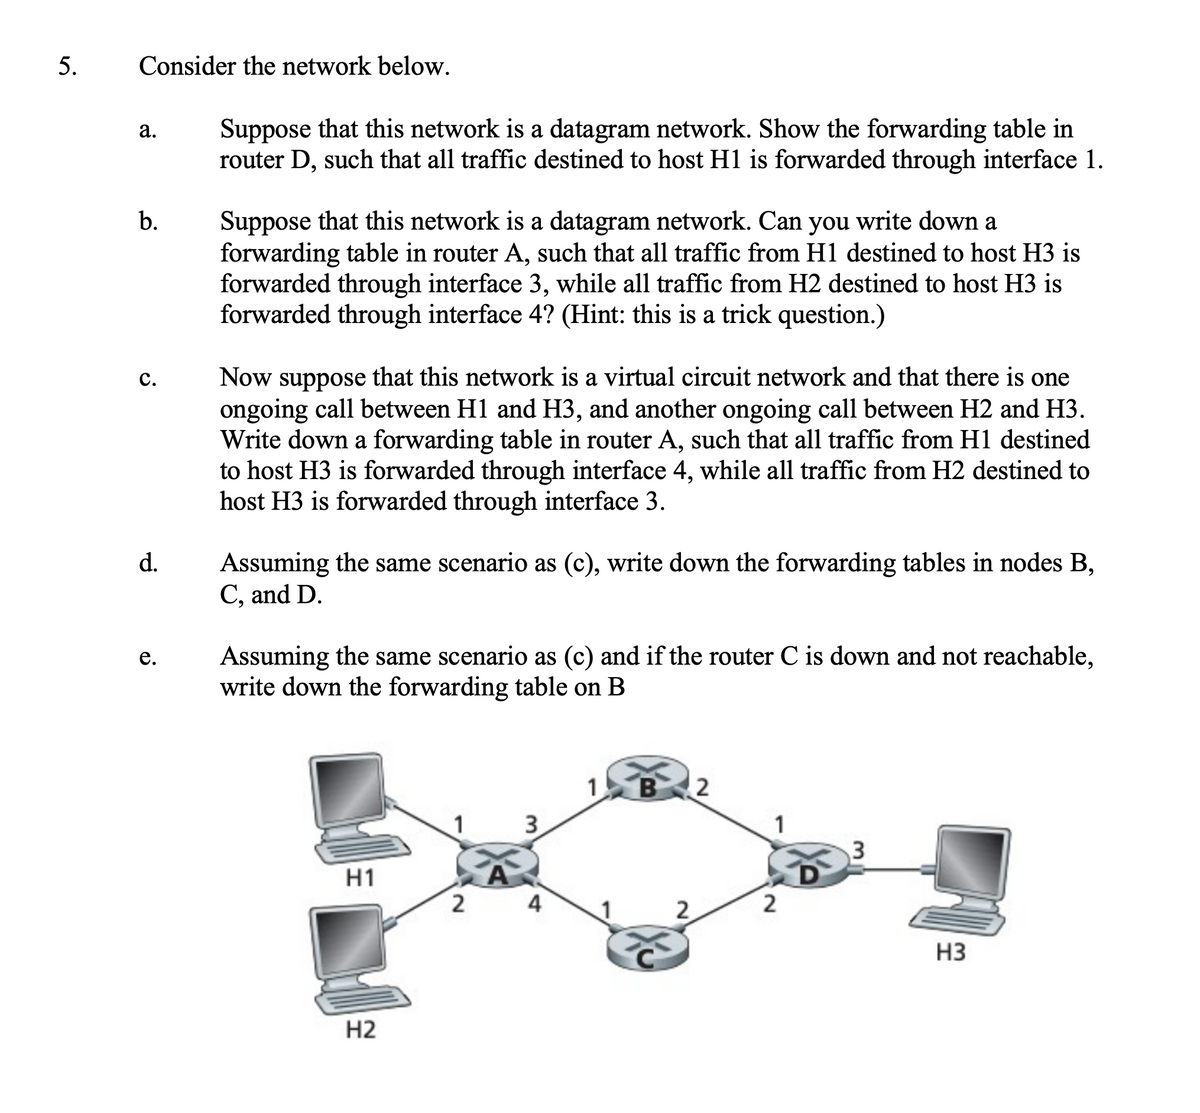 5.
Consider the network below.
Suppose that this network is a datagram network. Show the forwarding table in
router D, such that all traffic destined to host H1 is forwarded through interface 1.
а.
Suppose that this network is a datagram network. Can you write down a
forwarding table in router A, such that all traffic from H1 destined to host H3 is
forwarded through interface 3, while all traffic from H2 destined to host H3 is
forwarded through interface 4? (Hint: this is a trick question.)
Now suppose that this network is a virtual circuit network and that there is one
ongoing call between H1 and H3, and another ongoing call between H2 and H3.
Write down a forwarding table in router A, such that all traffic from H1 destined
to host H3 is forwarded through interface 4, while all traffic from H2 destined to
host H3 is forwarded through interface 3.
с.
Assuming the same scenario as (c), write down the forwarding tables in nodes B,
C, and D.
d.
Assuming the same scenario as (c) and if the router C is down and not reachable,
write down the forwarding table on B
1
B
3
1
H1
2
4
2
H3
H2
3.
b.
